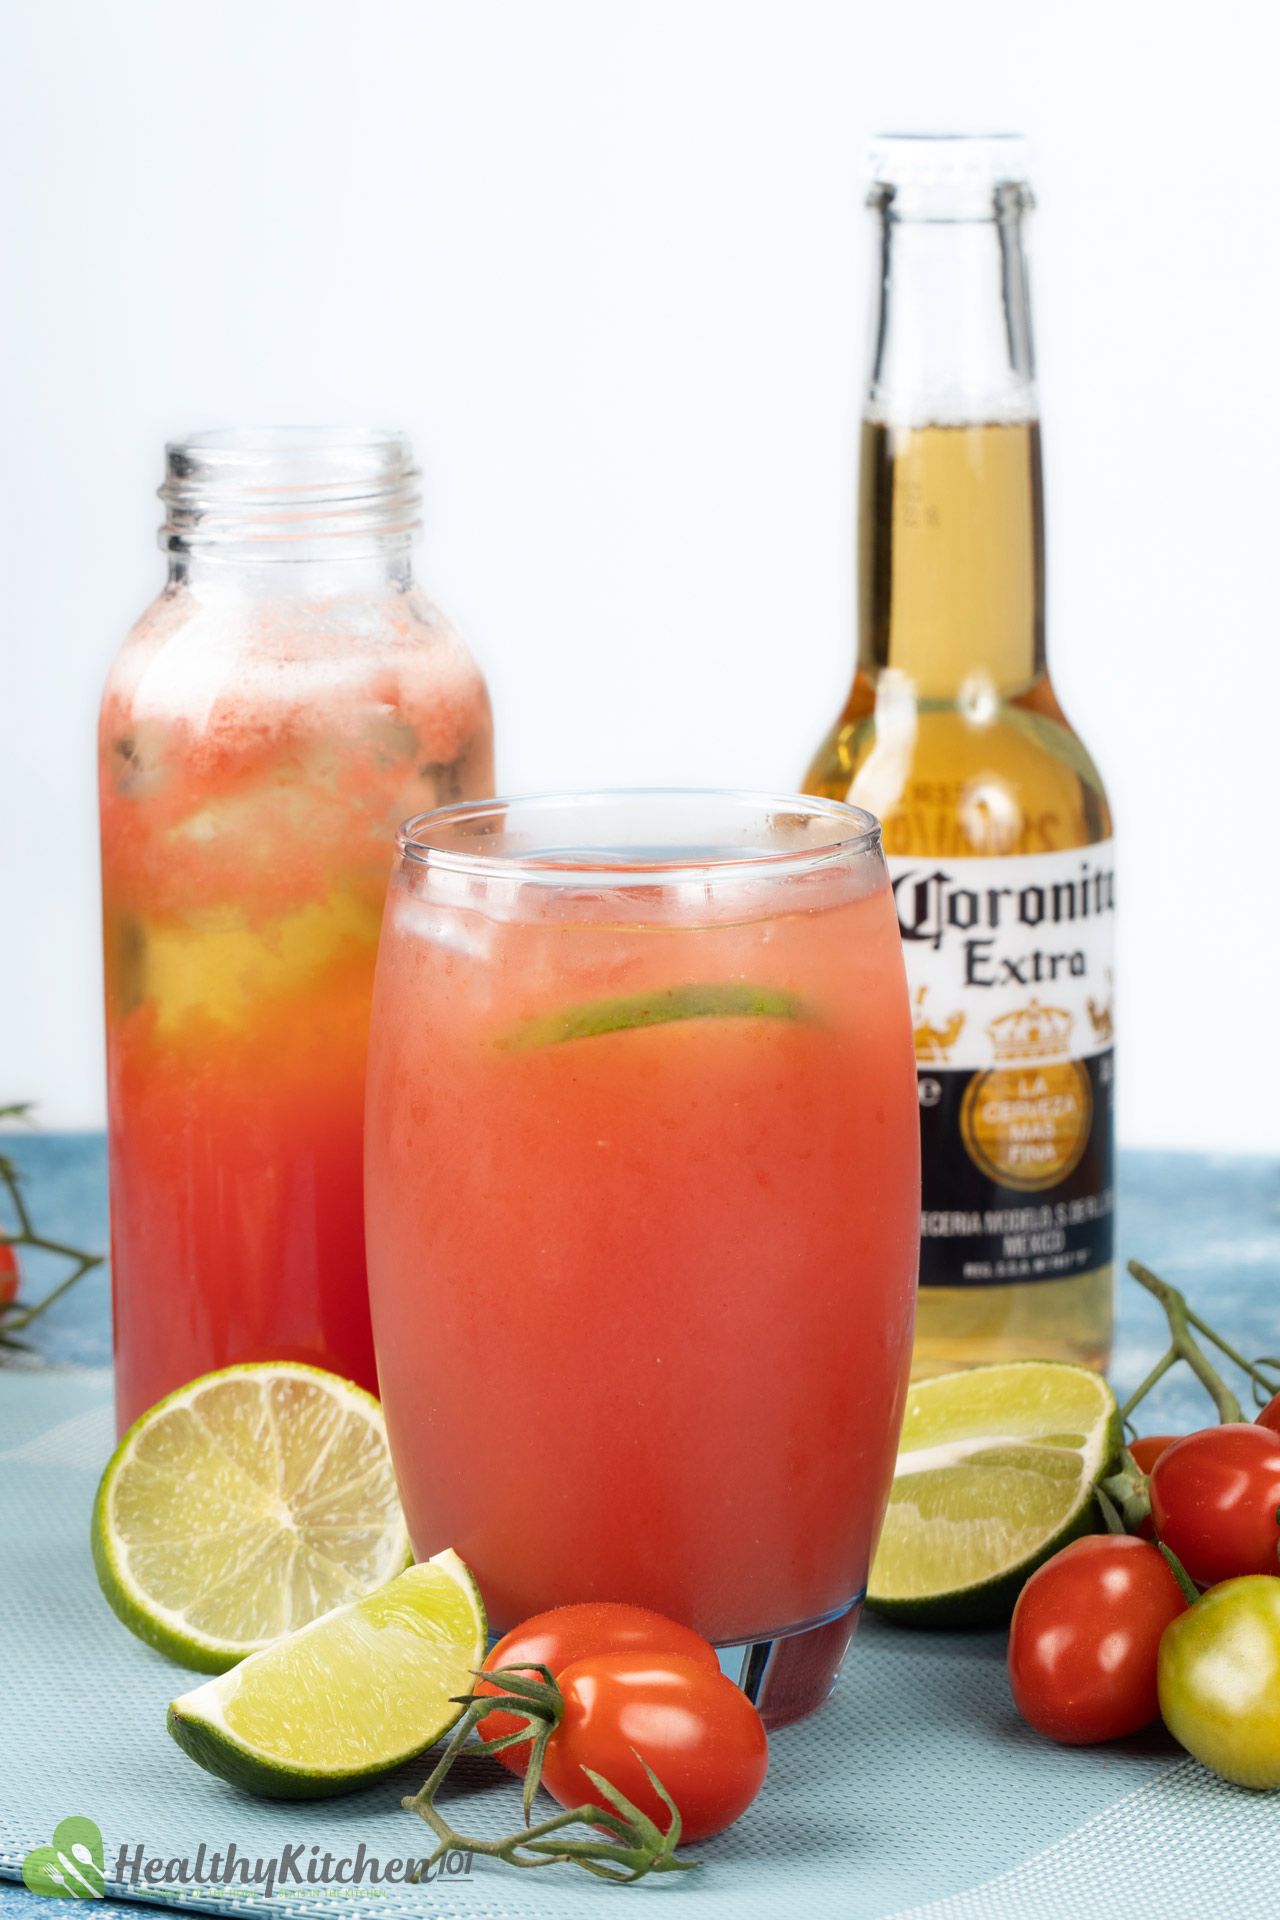 is Beer and Tomato Juice healthy